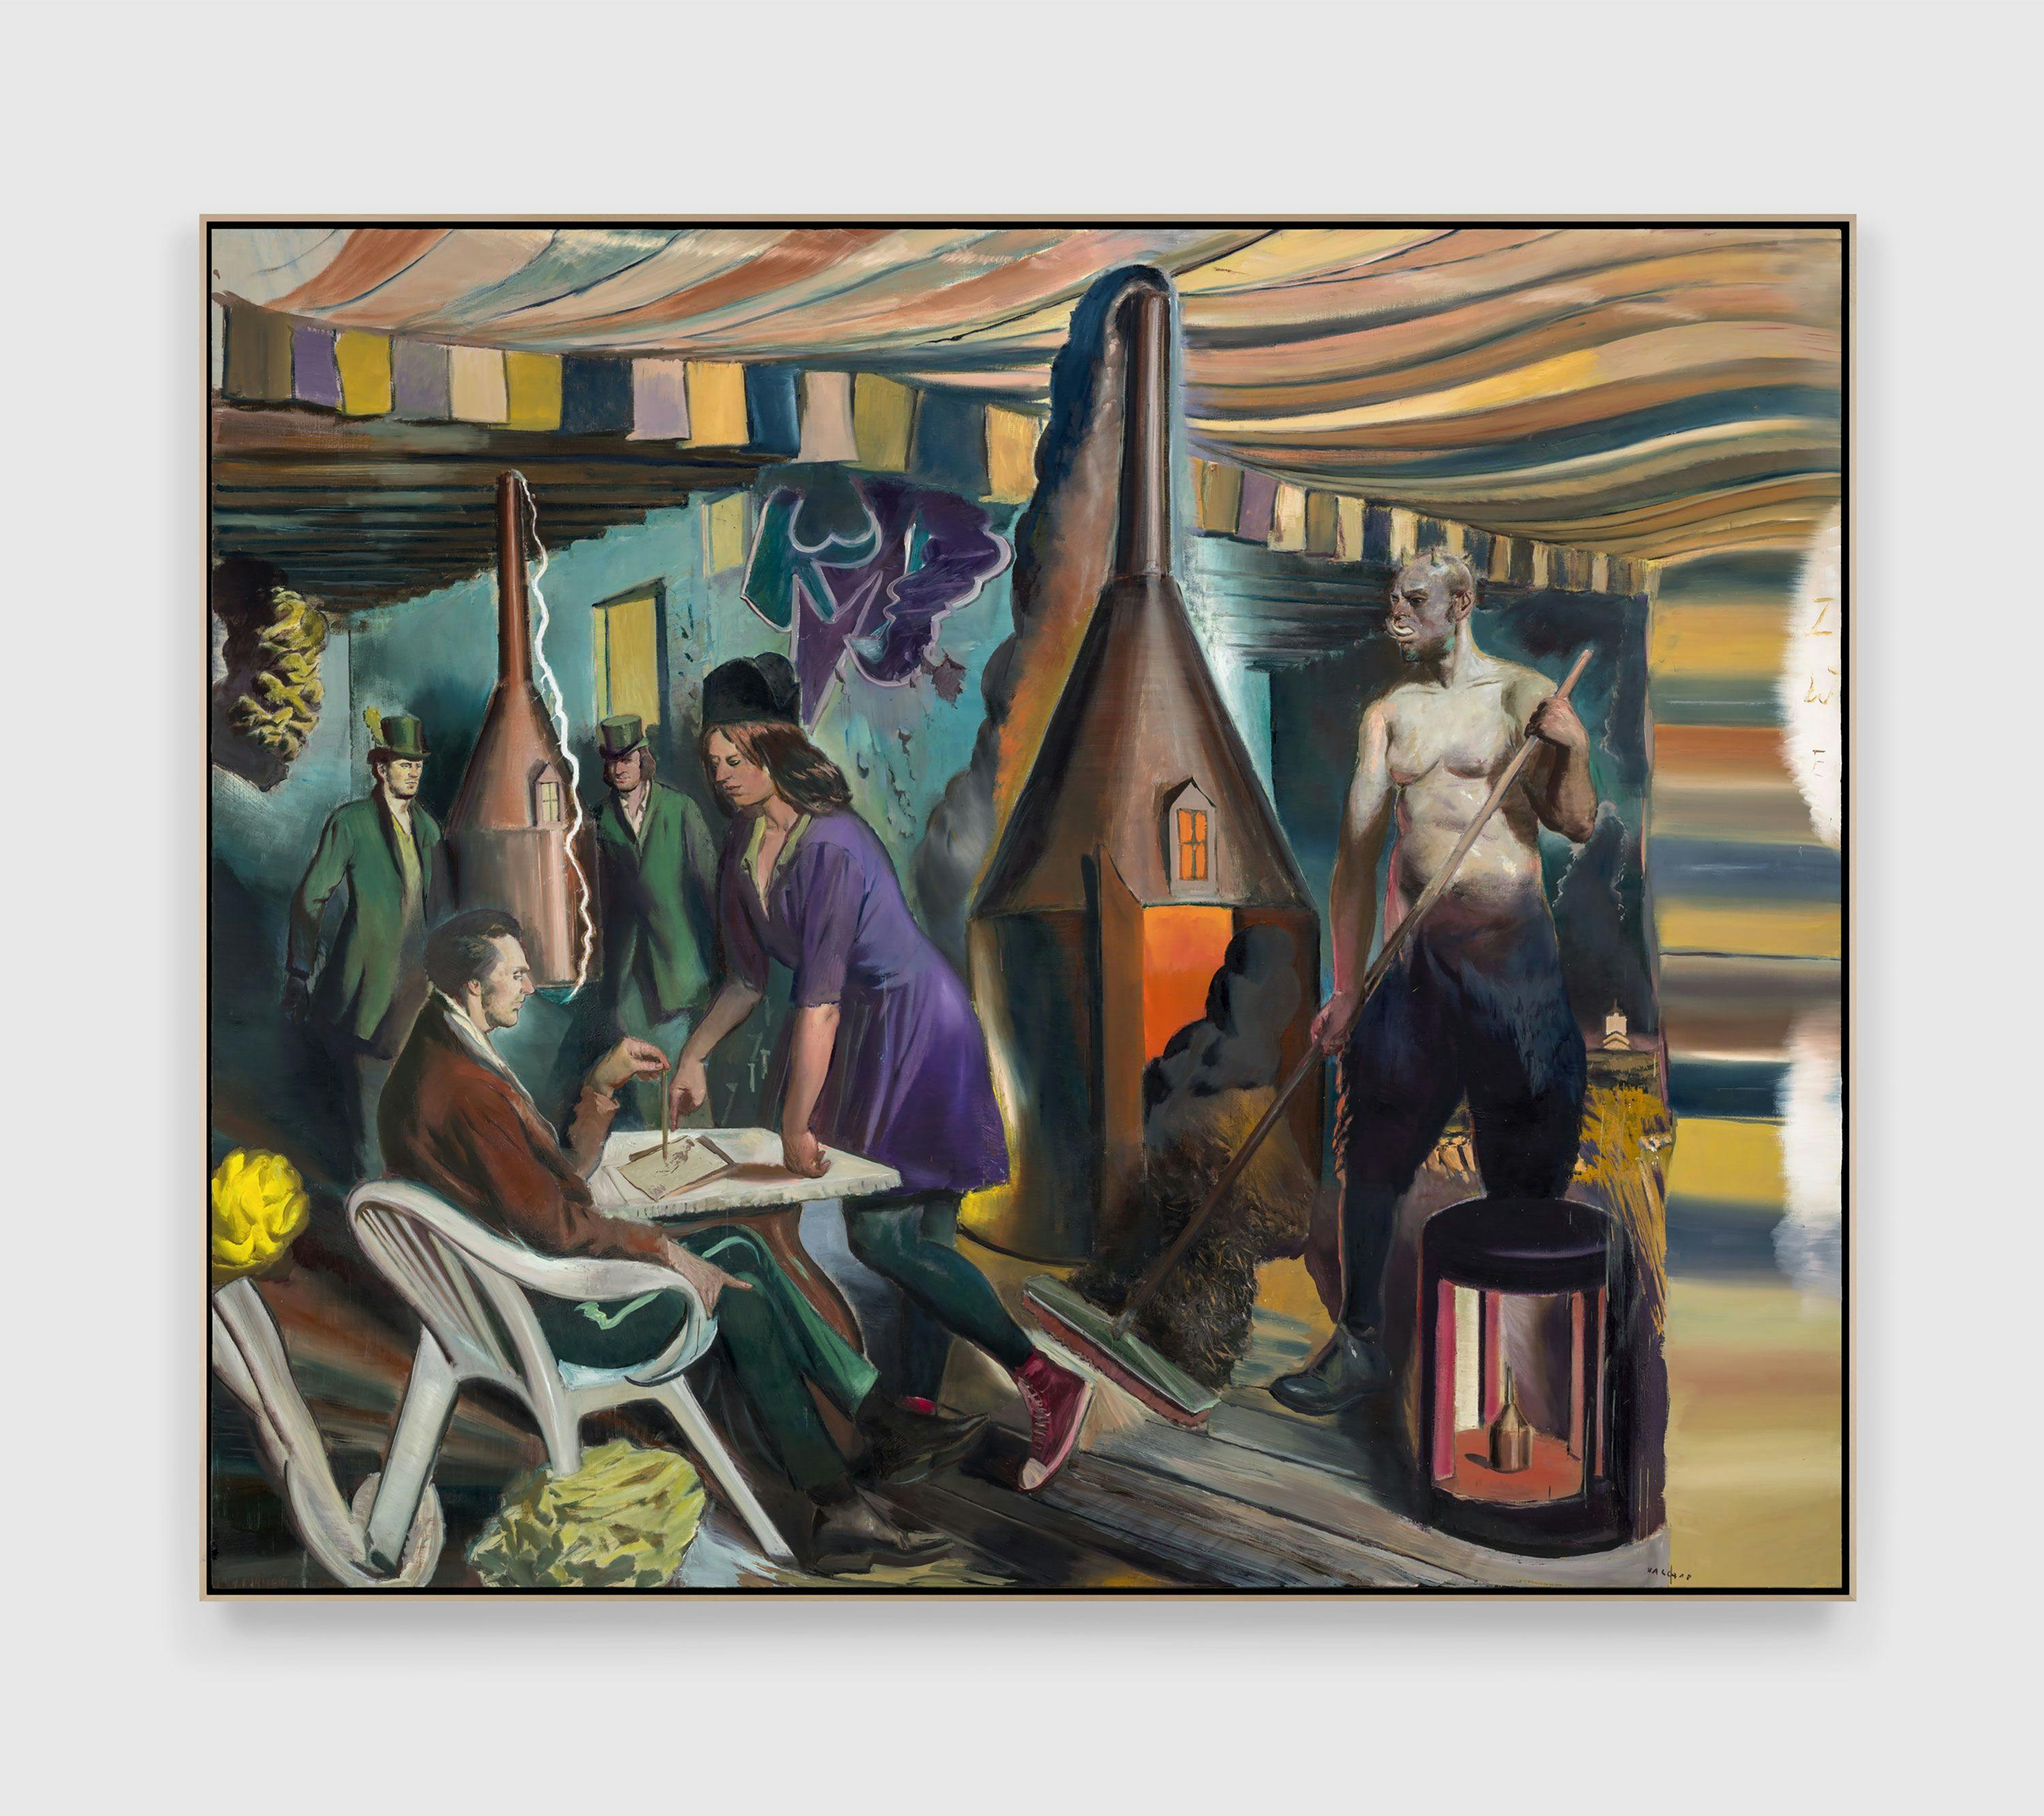 A painting by Neo Rauch, titled Zweifel, dated 2018.